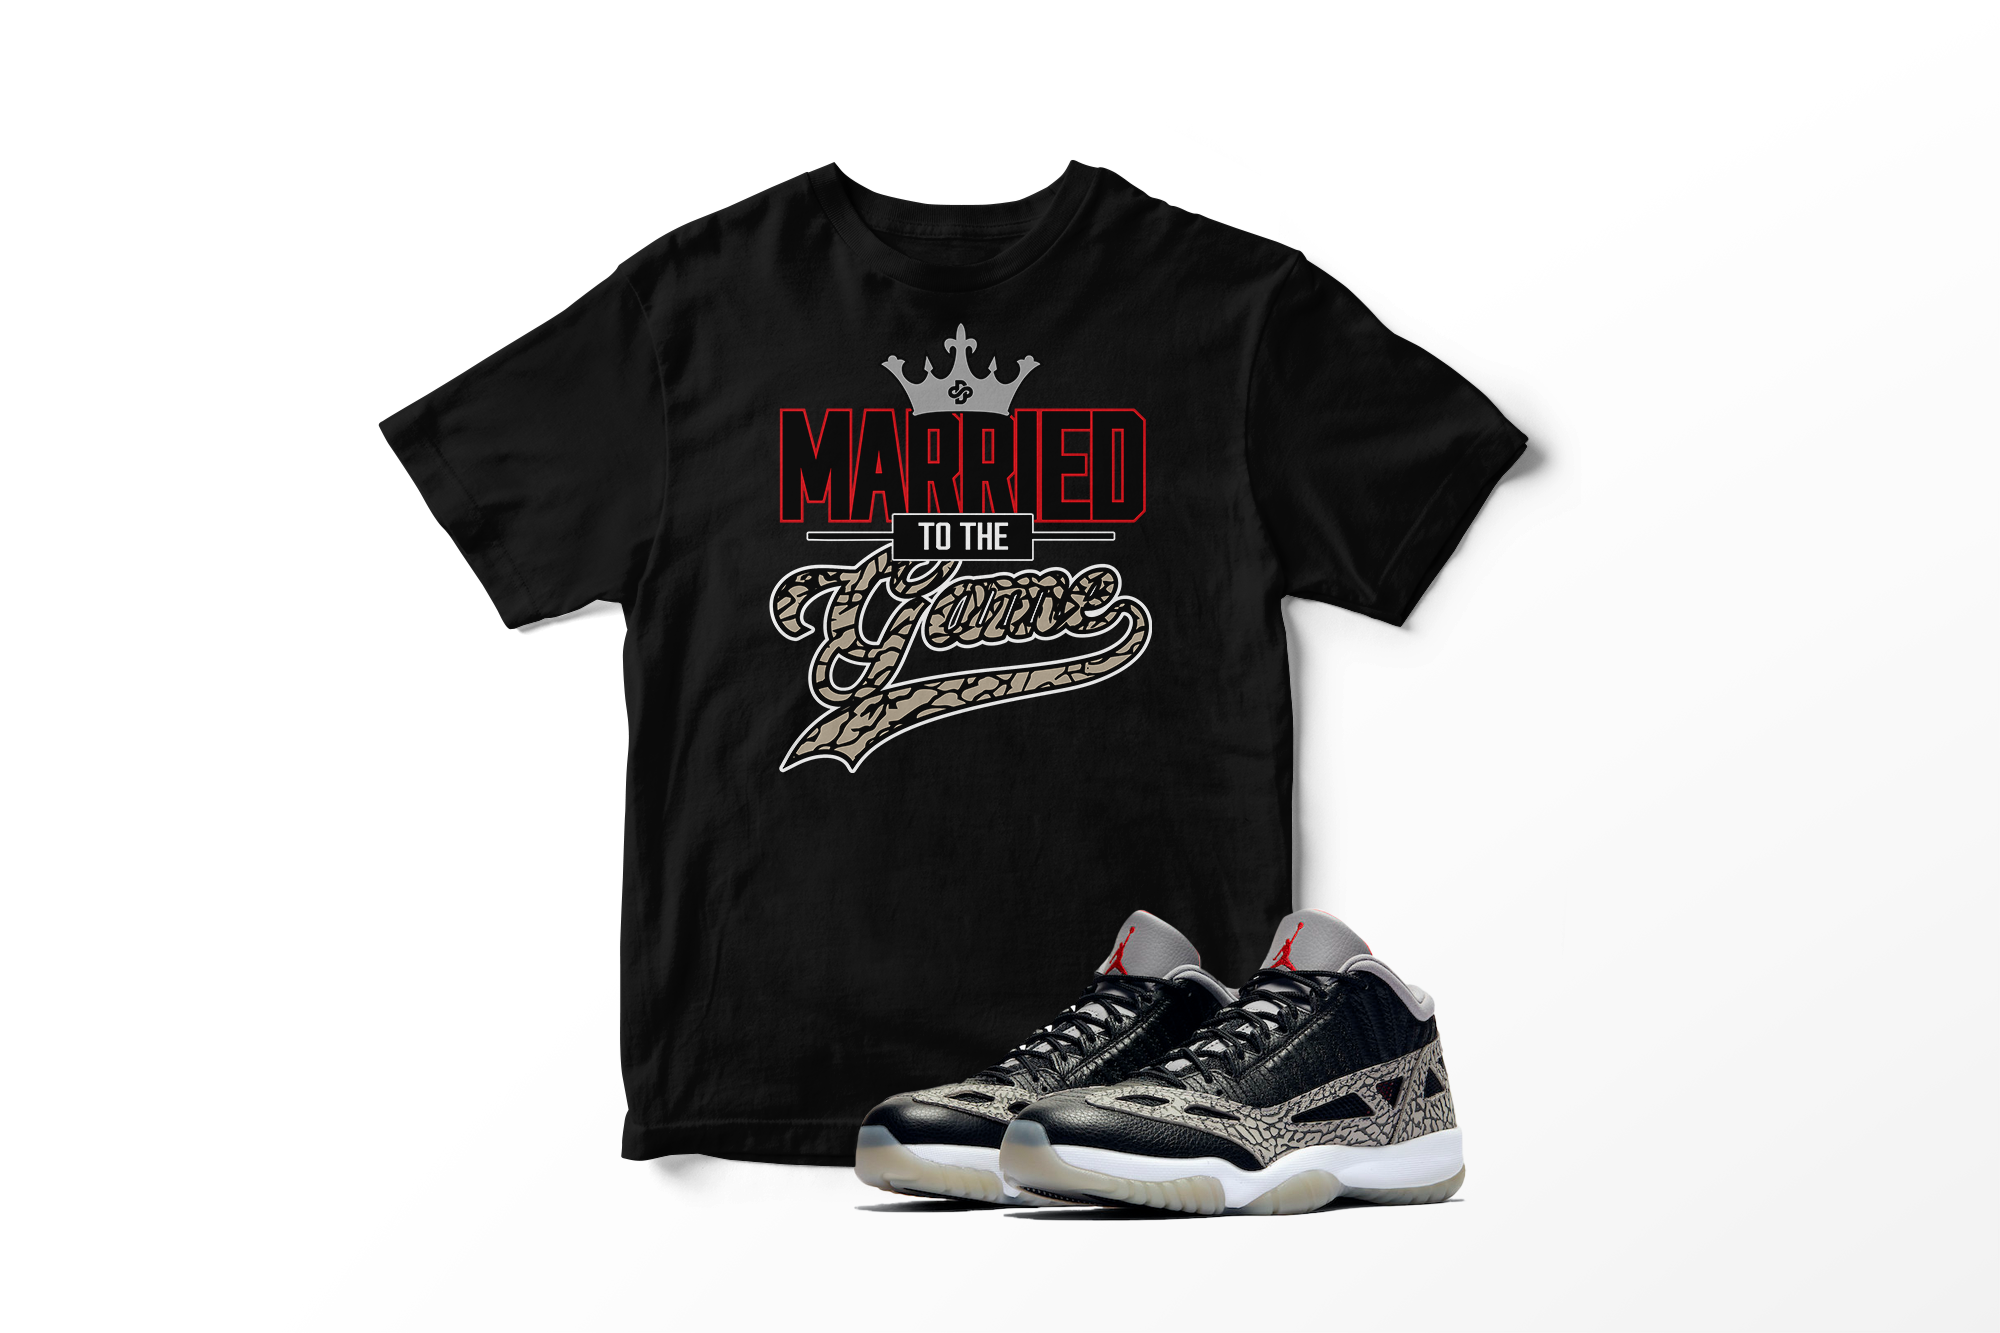 'Married To The Game' in Black Cement CW Short Sleeve Tee